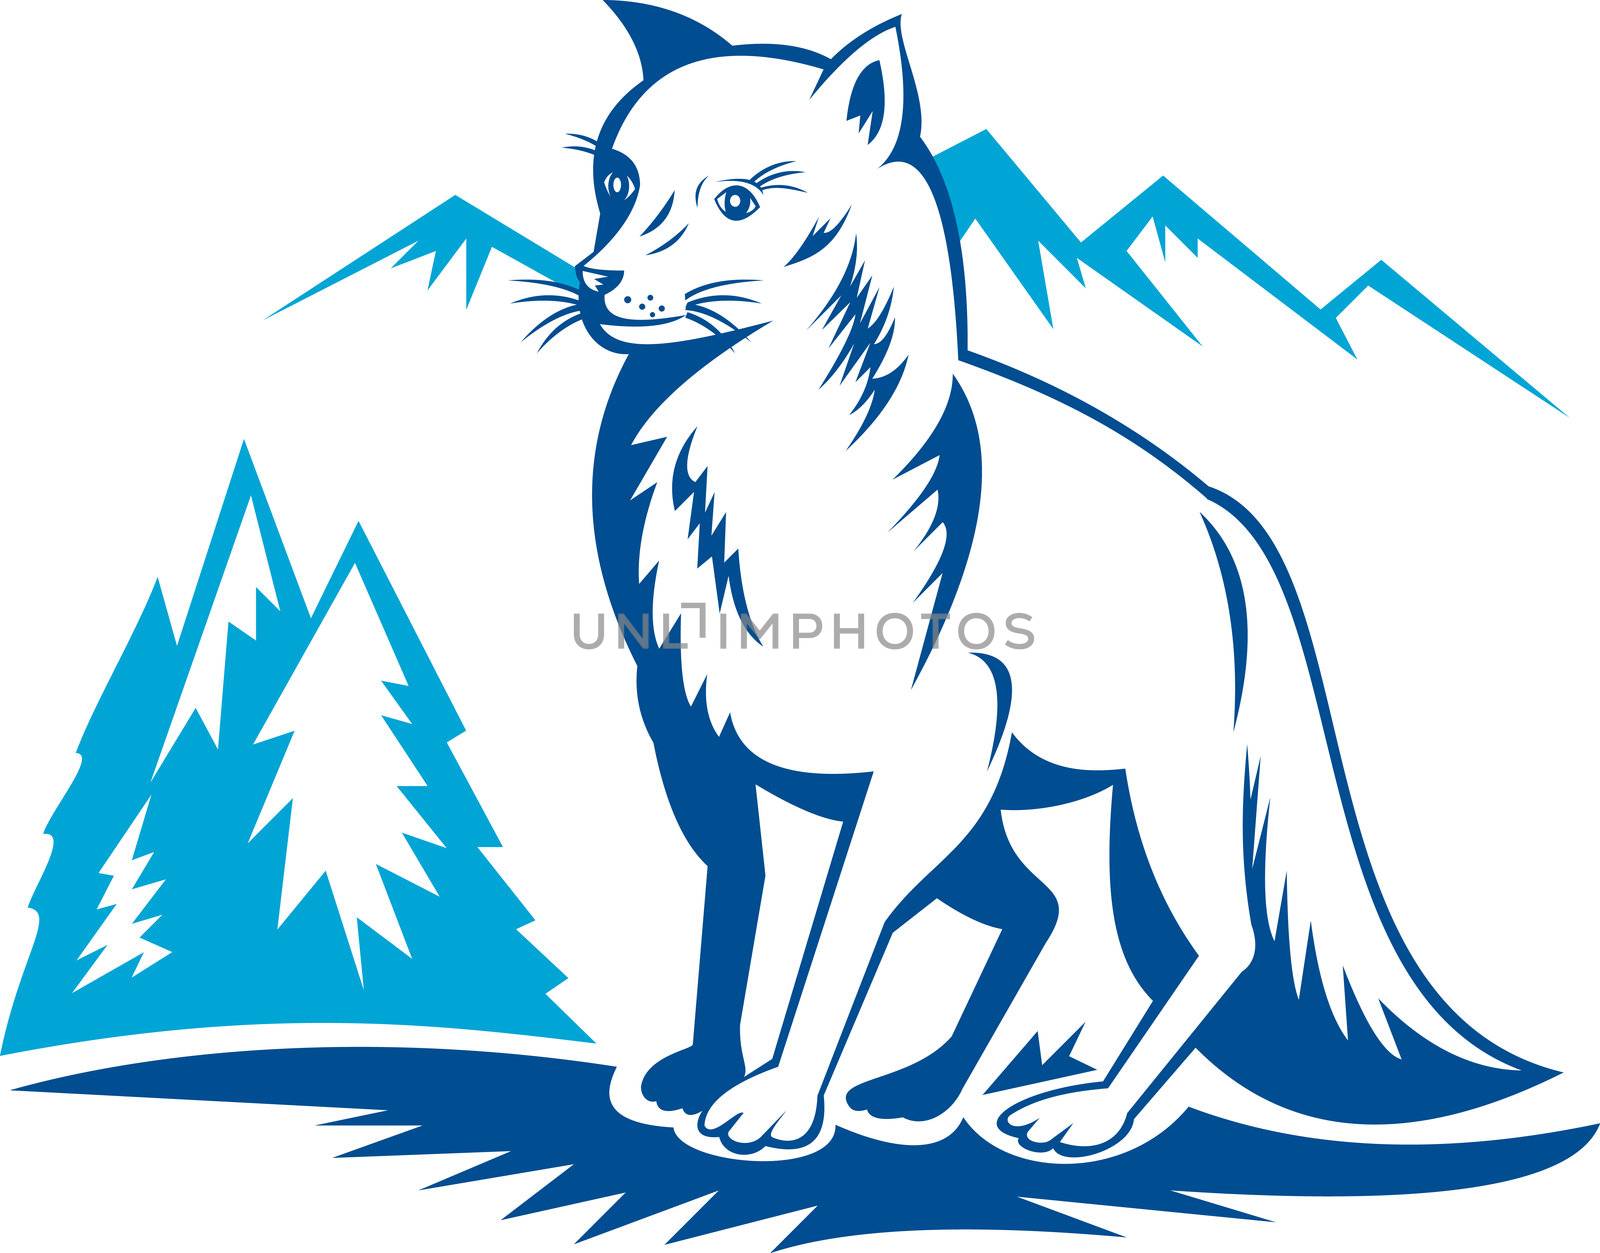 illustration of a Fox with mountains in the background done in retro style